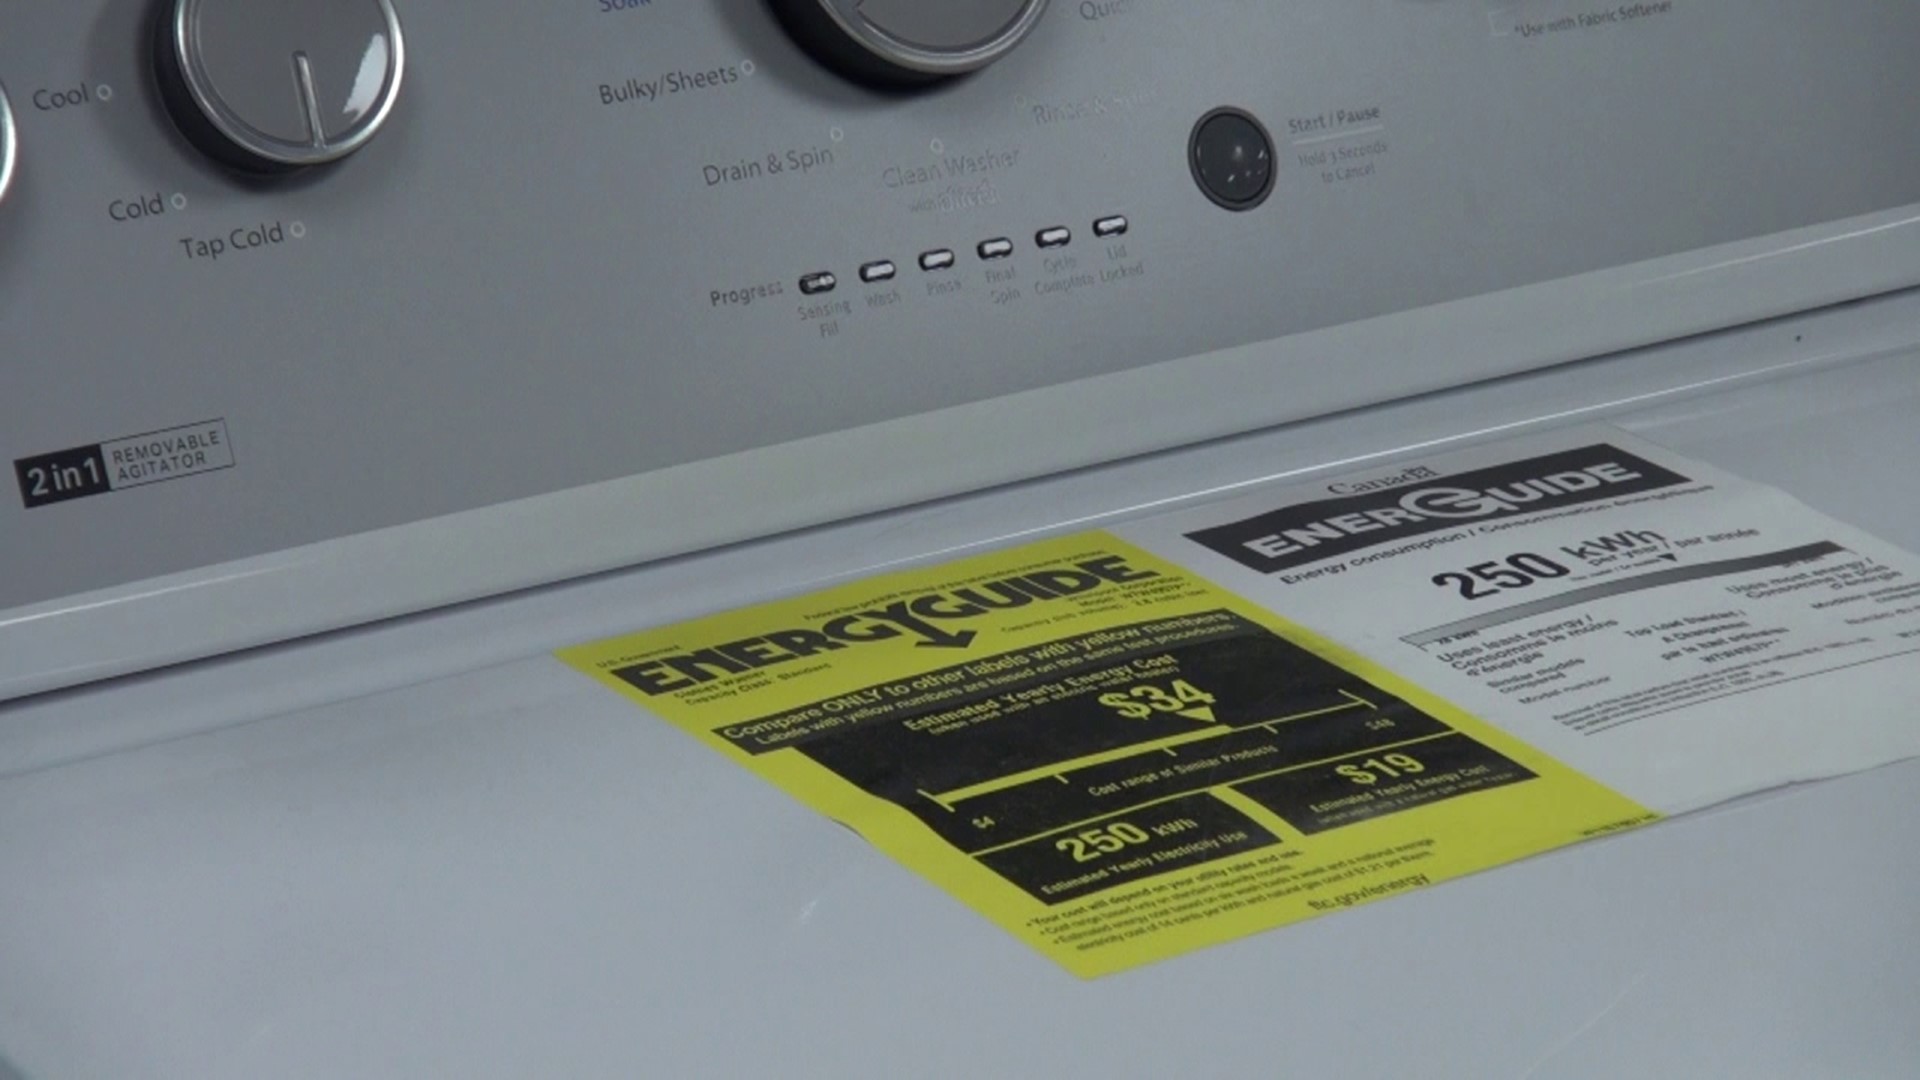 Workers at an appliance store in Lackawanna County have tips on how you can save energy right at home.